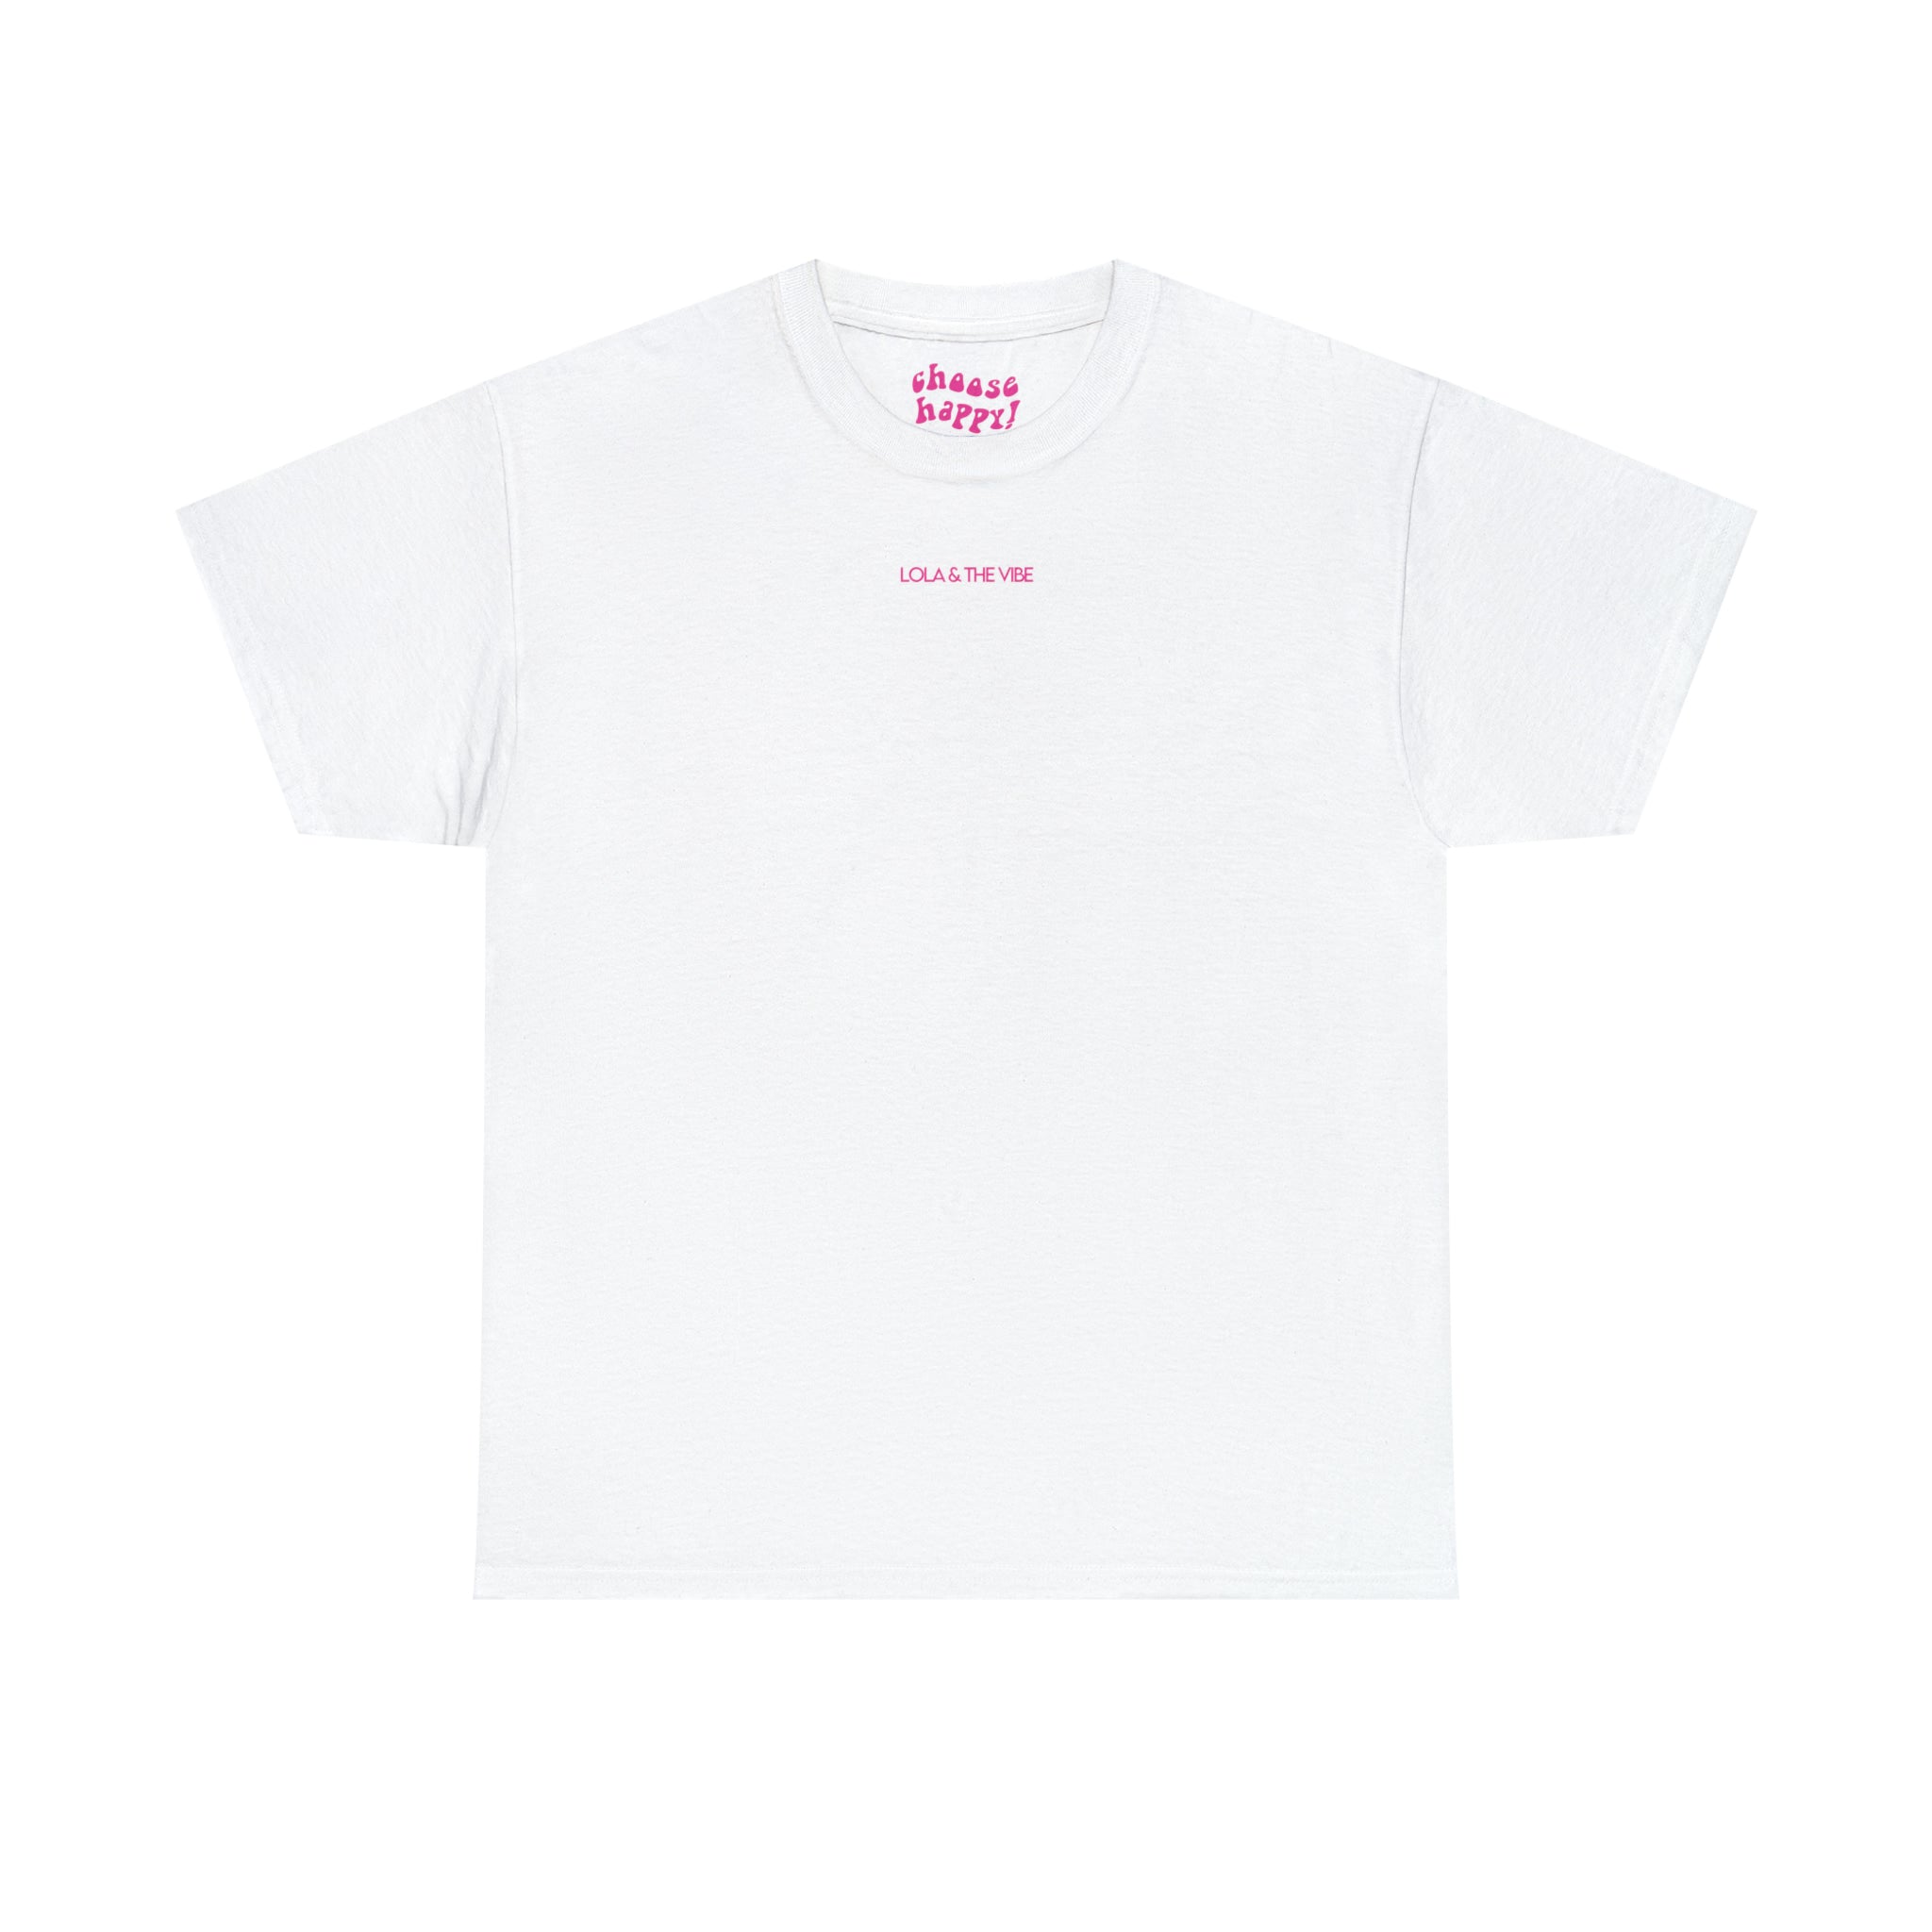 SYLMT Tee - White With Hot Pink